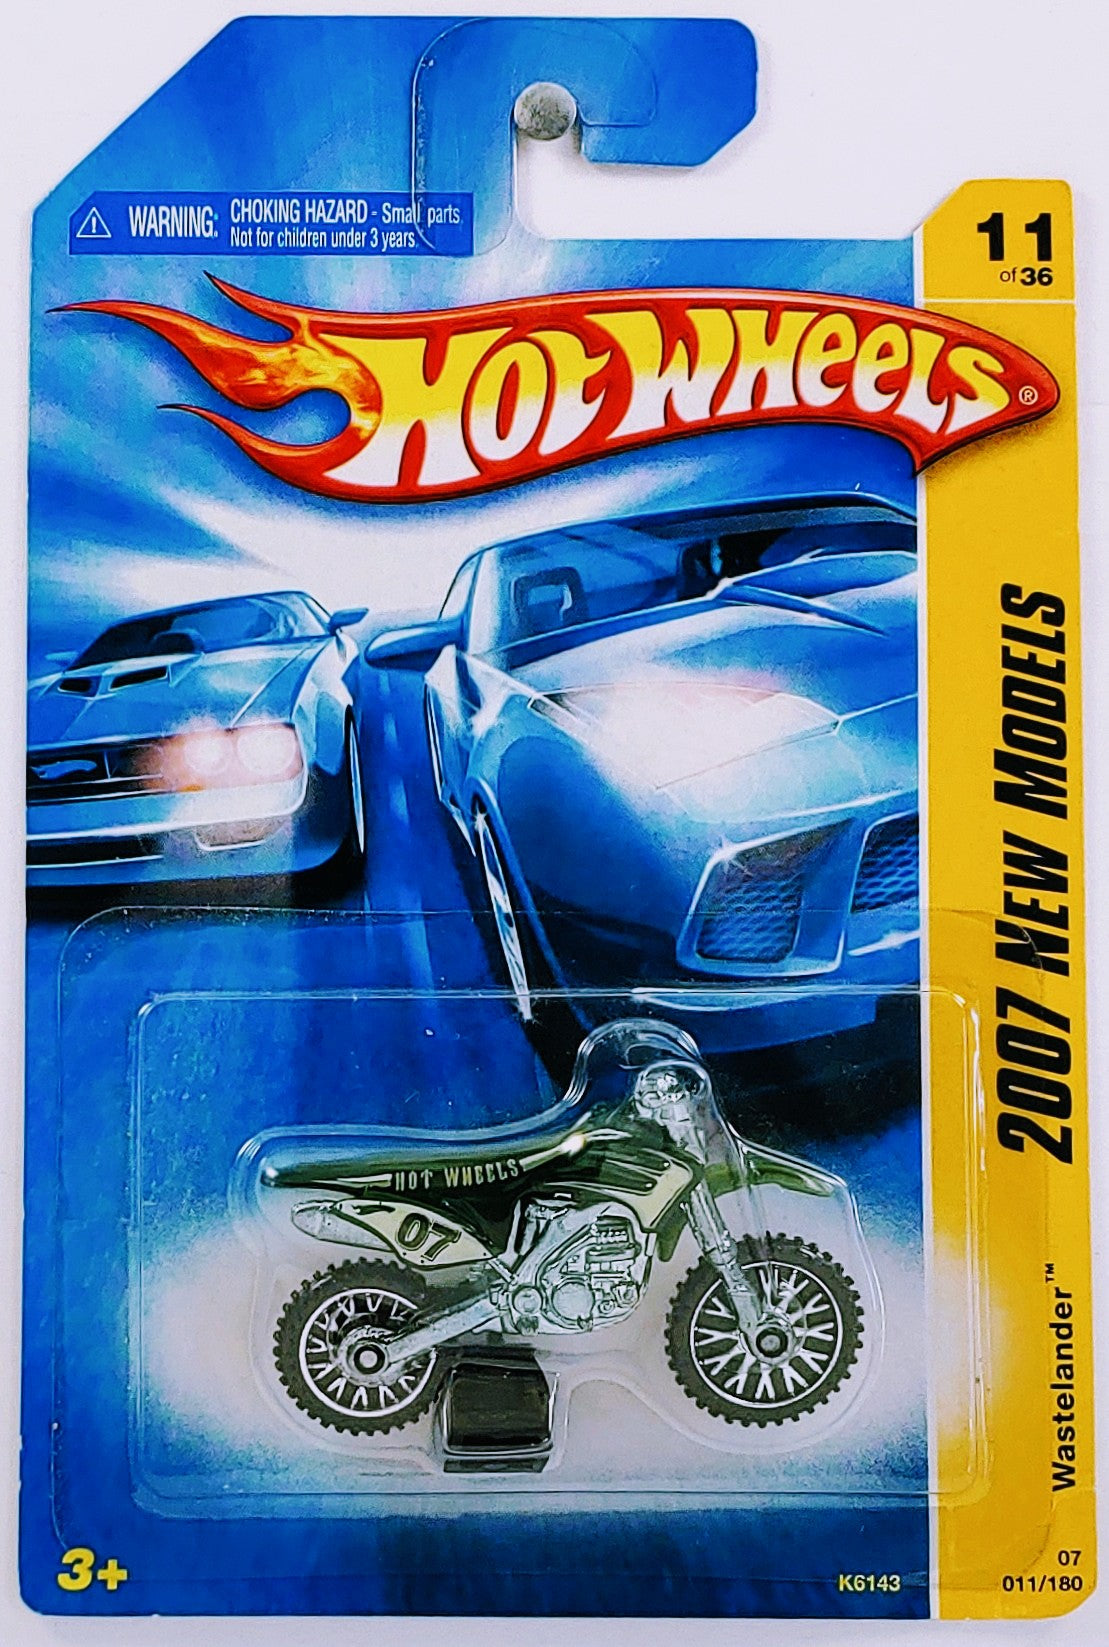 Hot Wheels 2007 - Collector # 011/180 - New Models 11/36 - Wastelander (Dirt Bike, Motorcycle) - Green - Chrome Spoked Wheels - USA Card Molded Blister